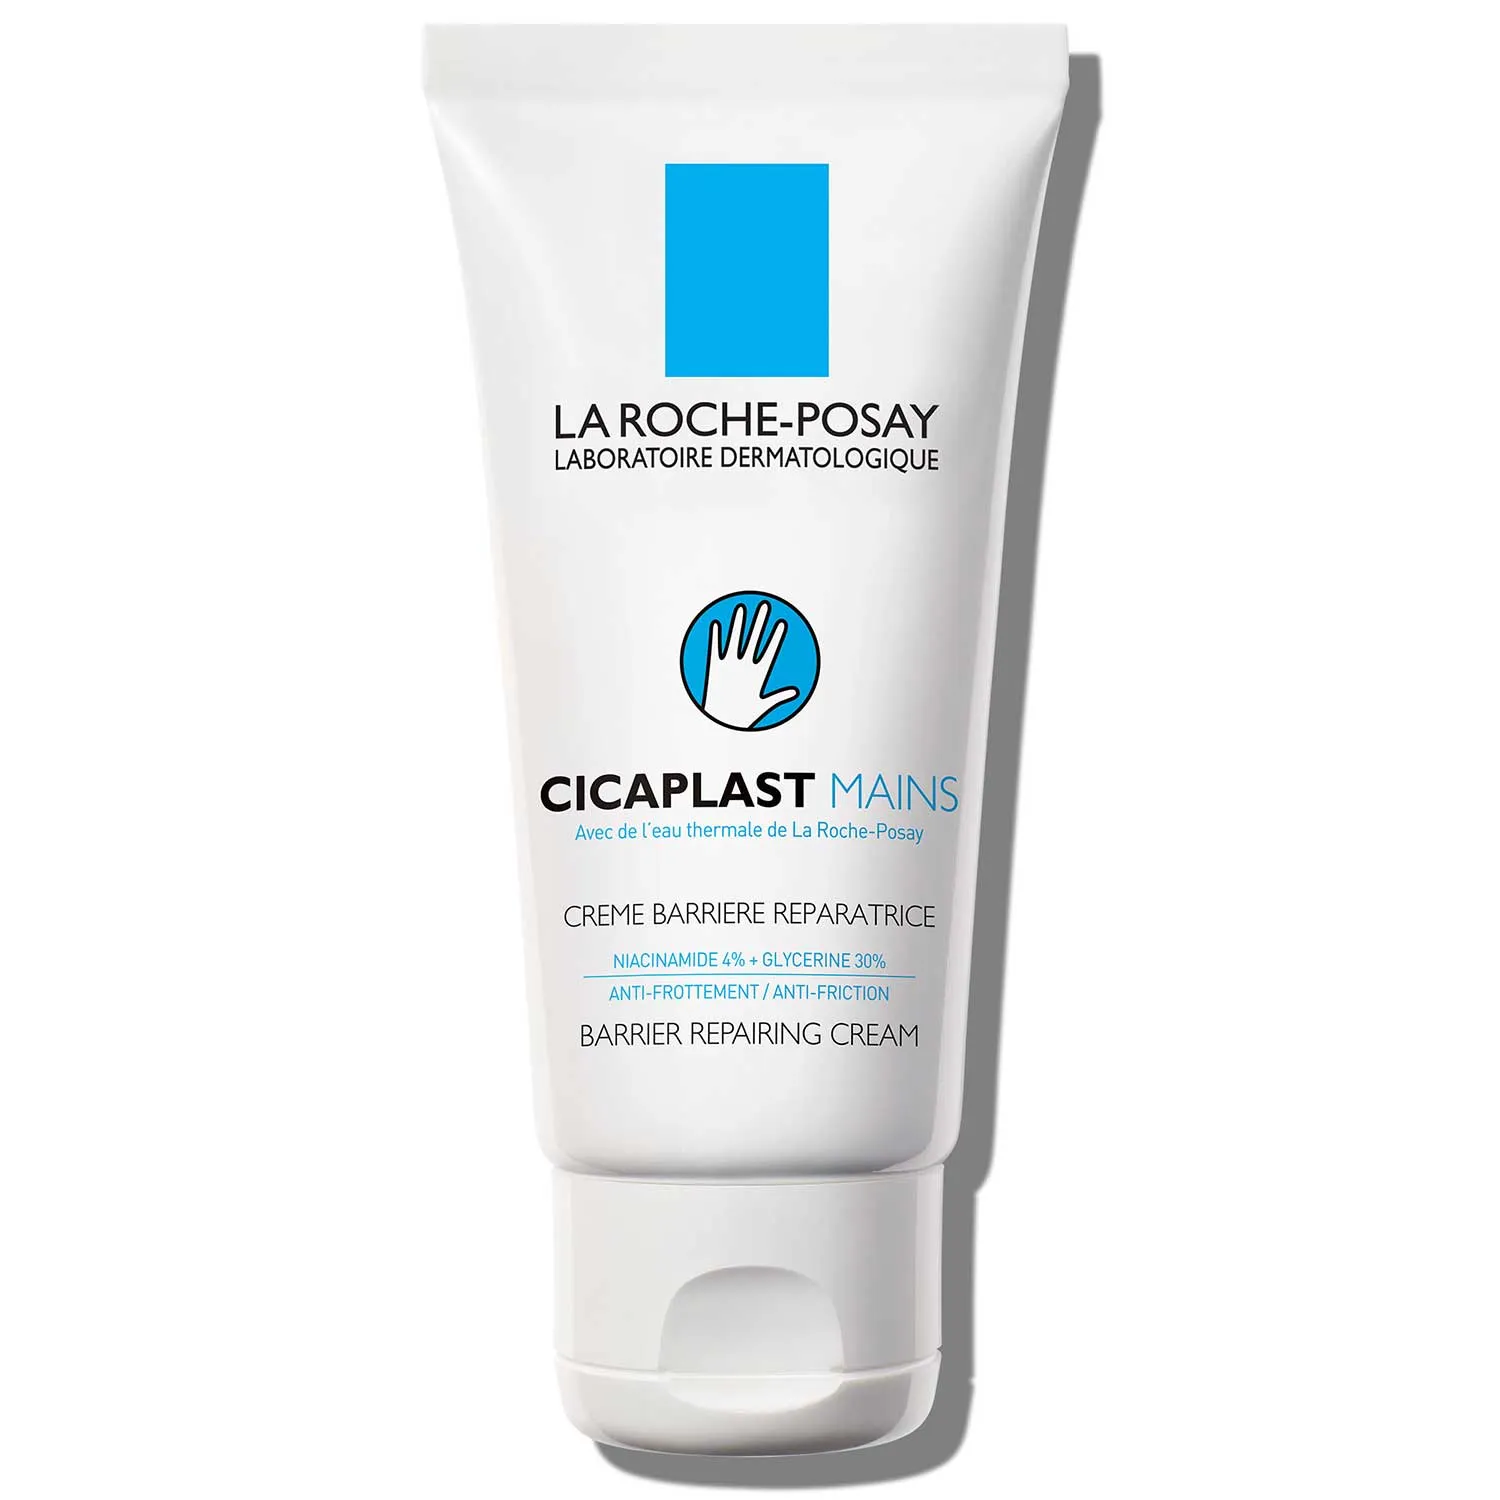 Cicaplast Hand Cream by La Roche Posay, one of the best La Roche Posay products.